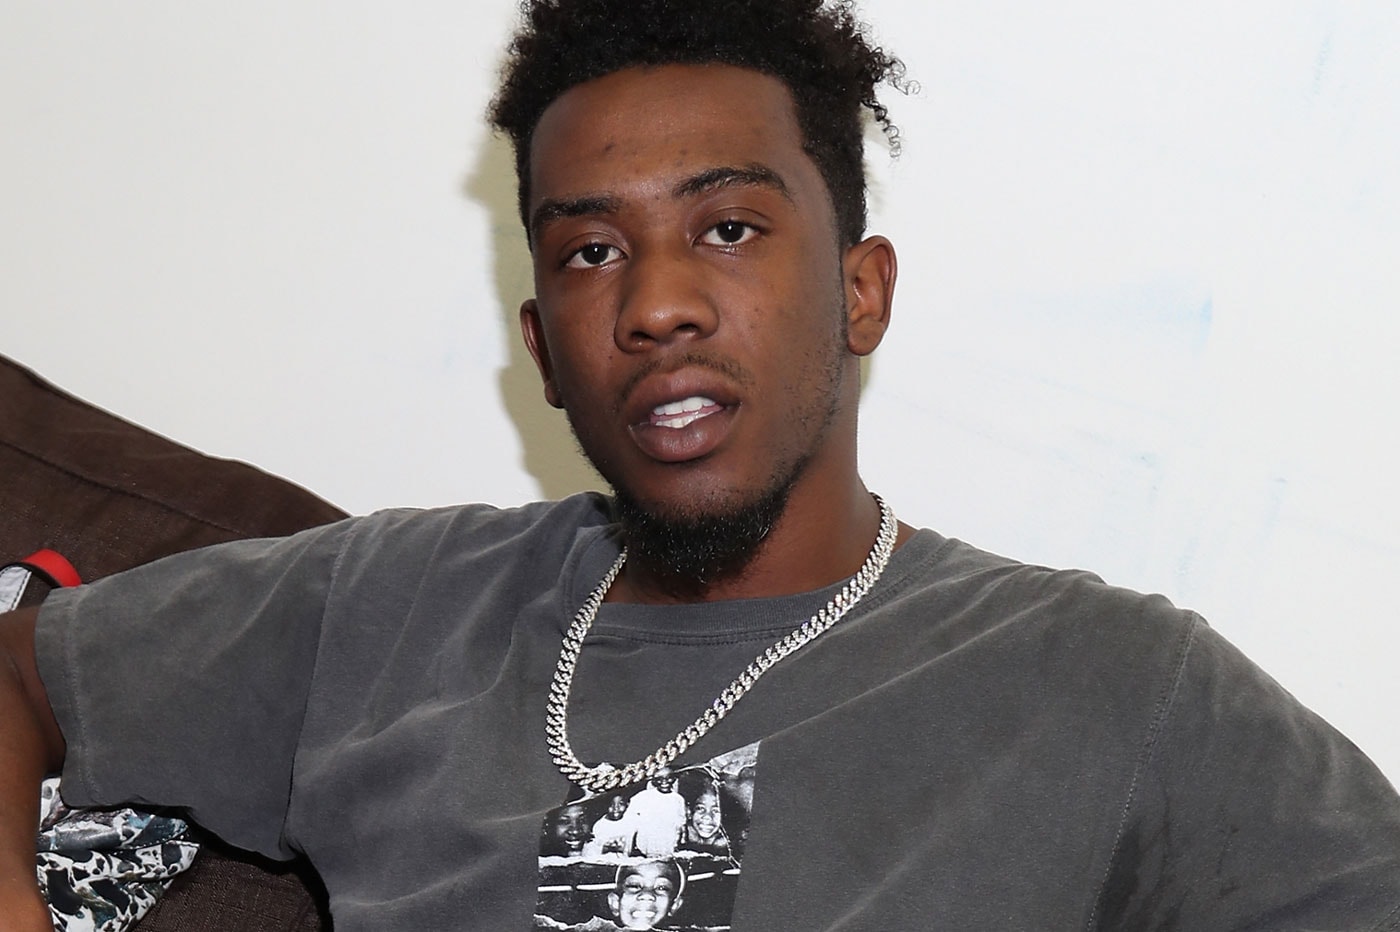 Desiigner Doesn't Consider Himself a Rapper or His Music as Hip-Hop